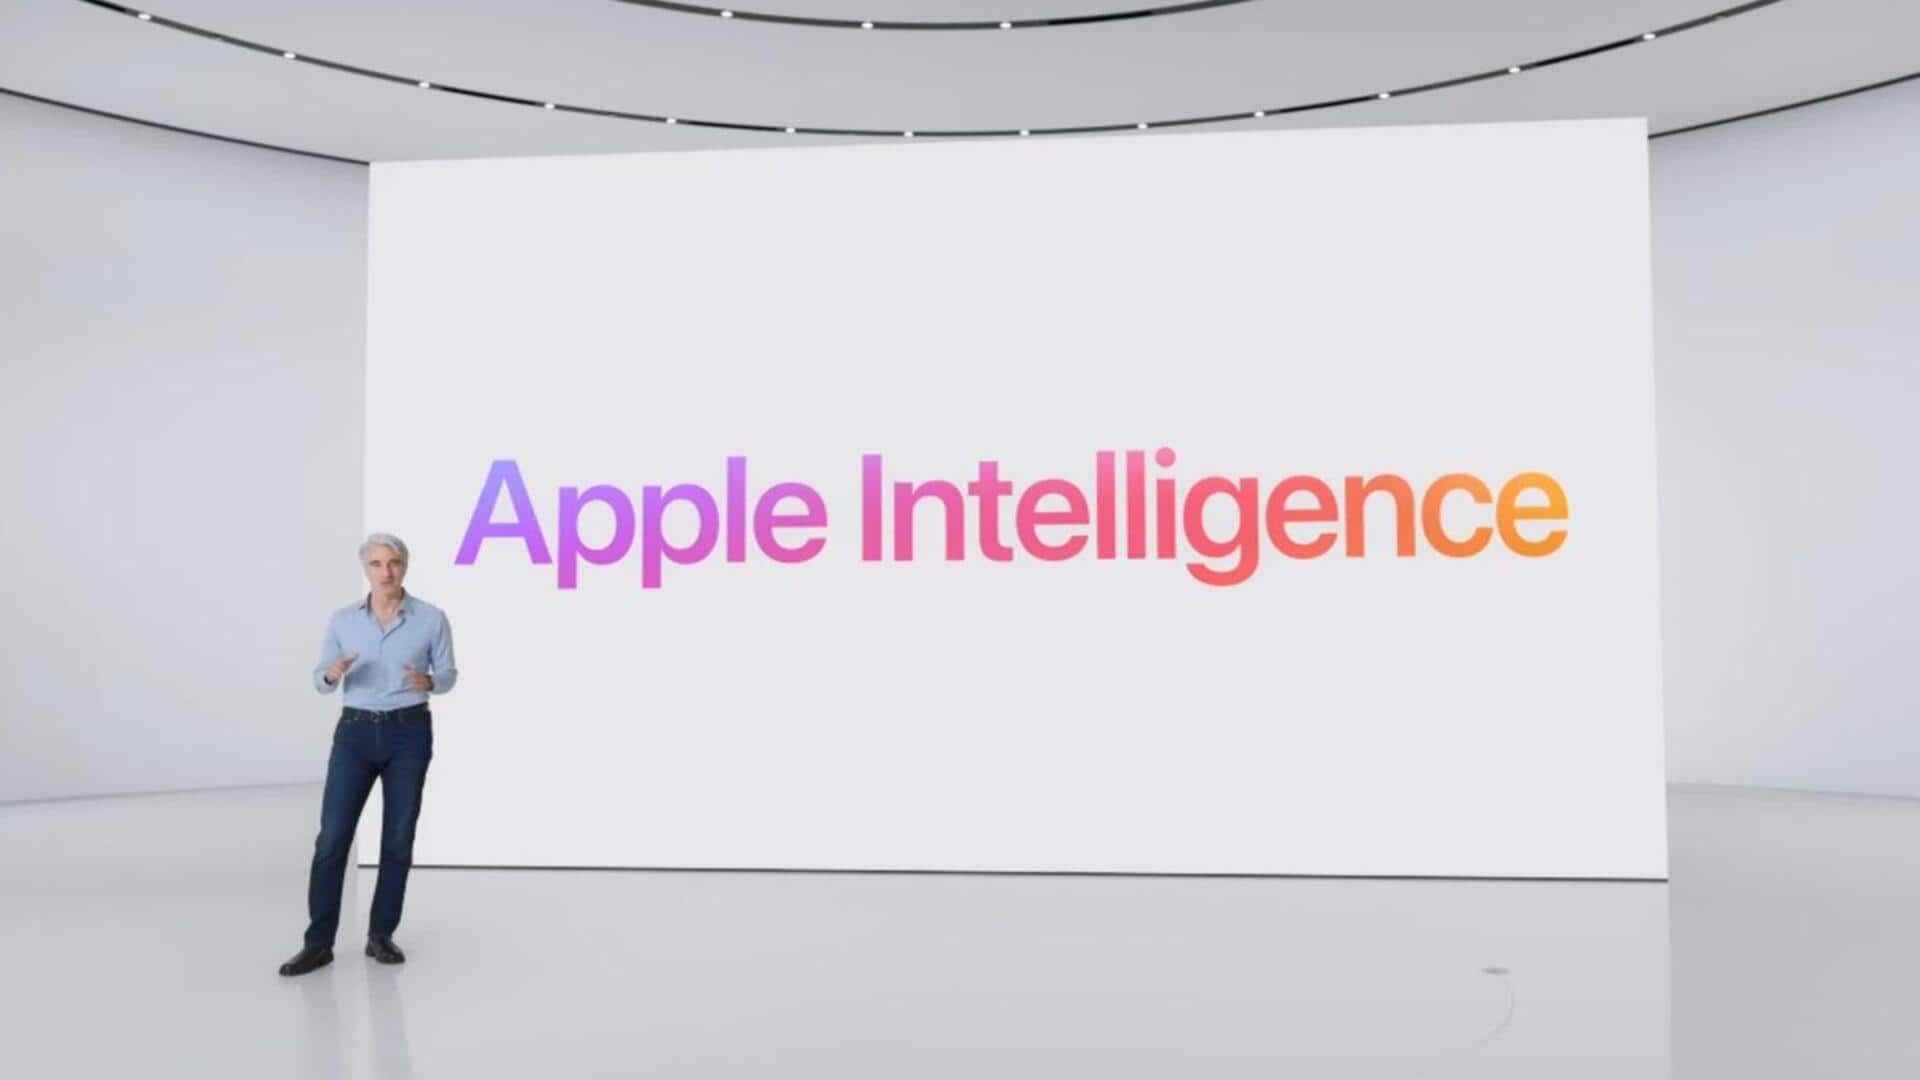 Some Apple Intelligence features may be put behind a paywall